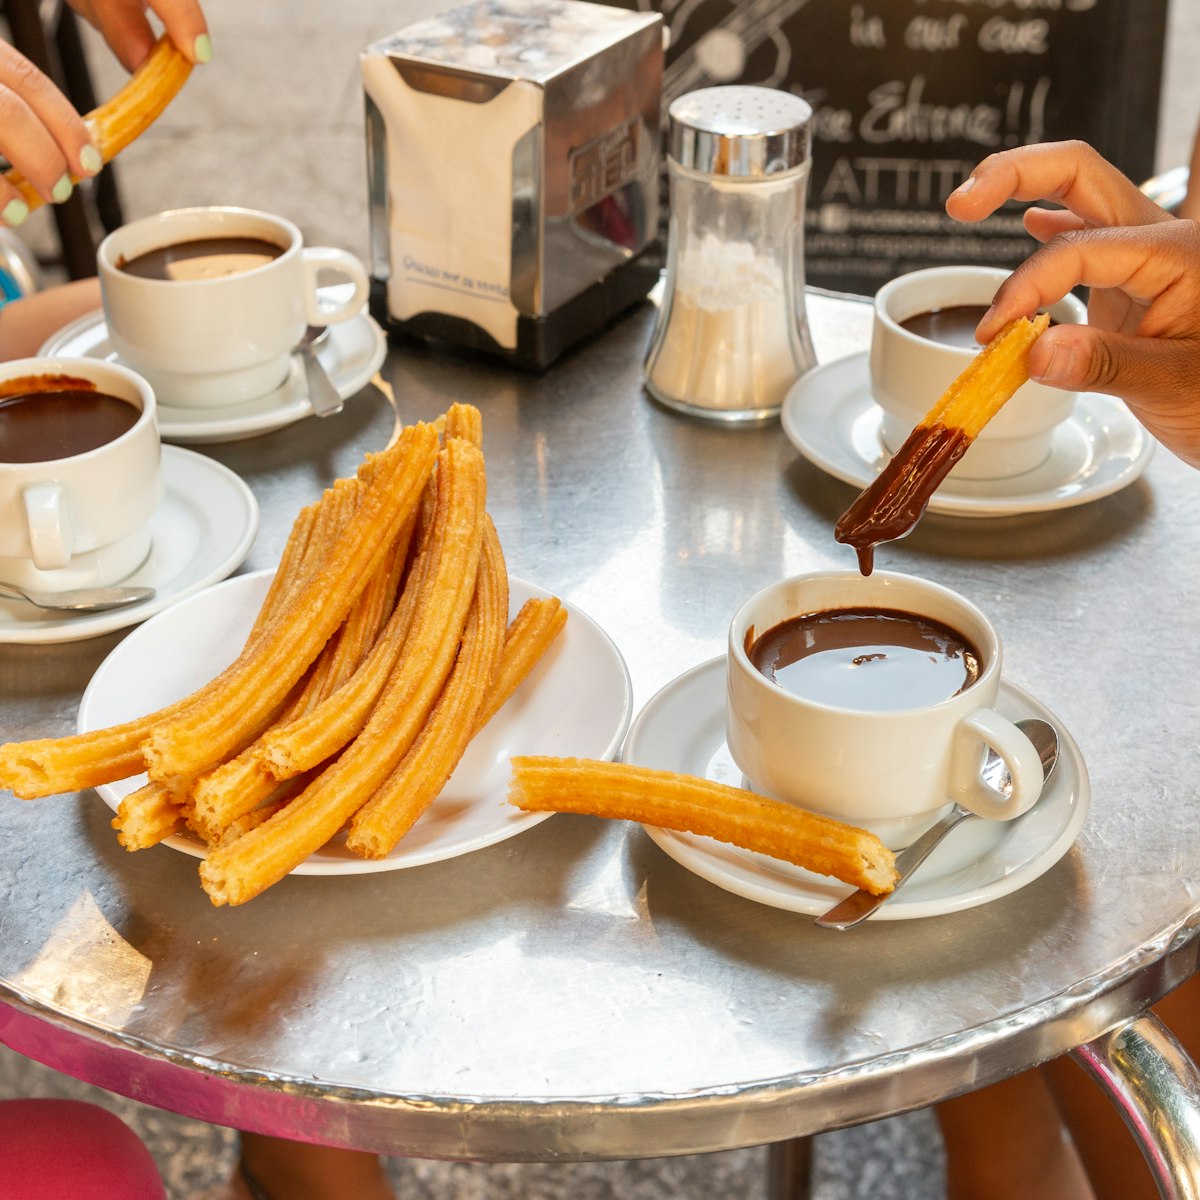 MADRID - JUNE 28, 2013: Churros and hot chocolate at the Chocolateria San Gines; Shutterstock ID 1678244413; GL: 65050; netsuite: 65050; full: poi; name: erin
1678244413